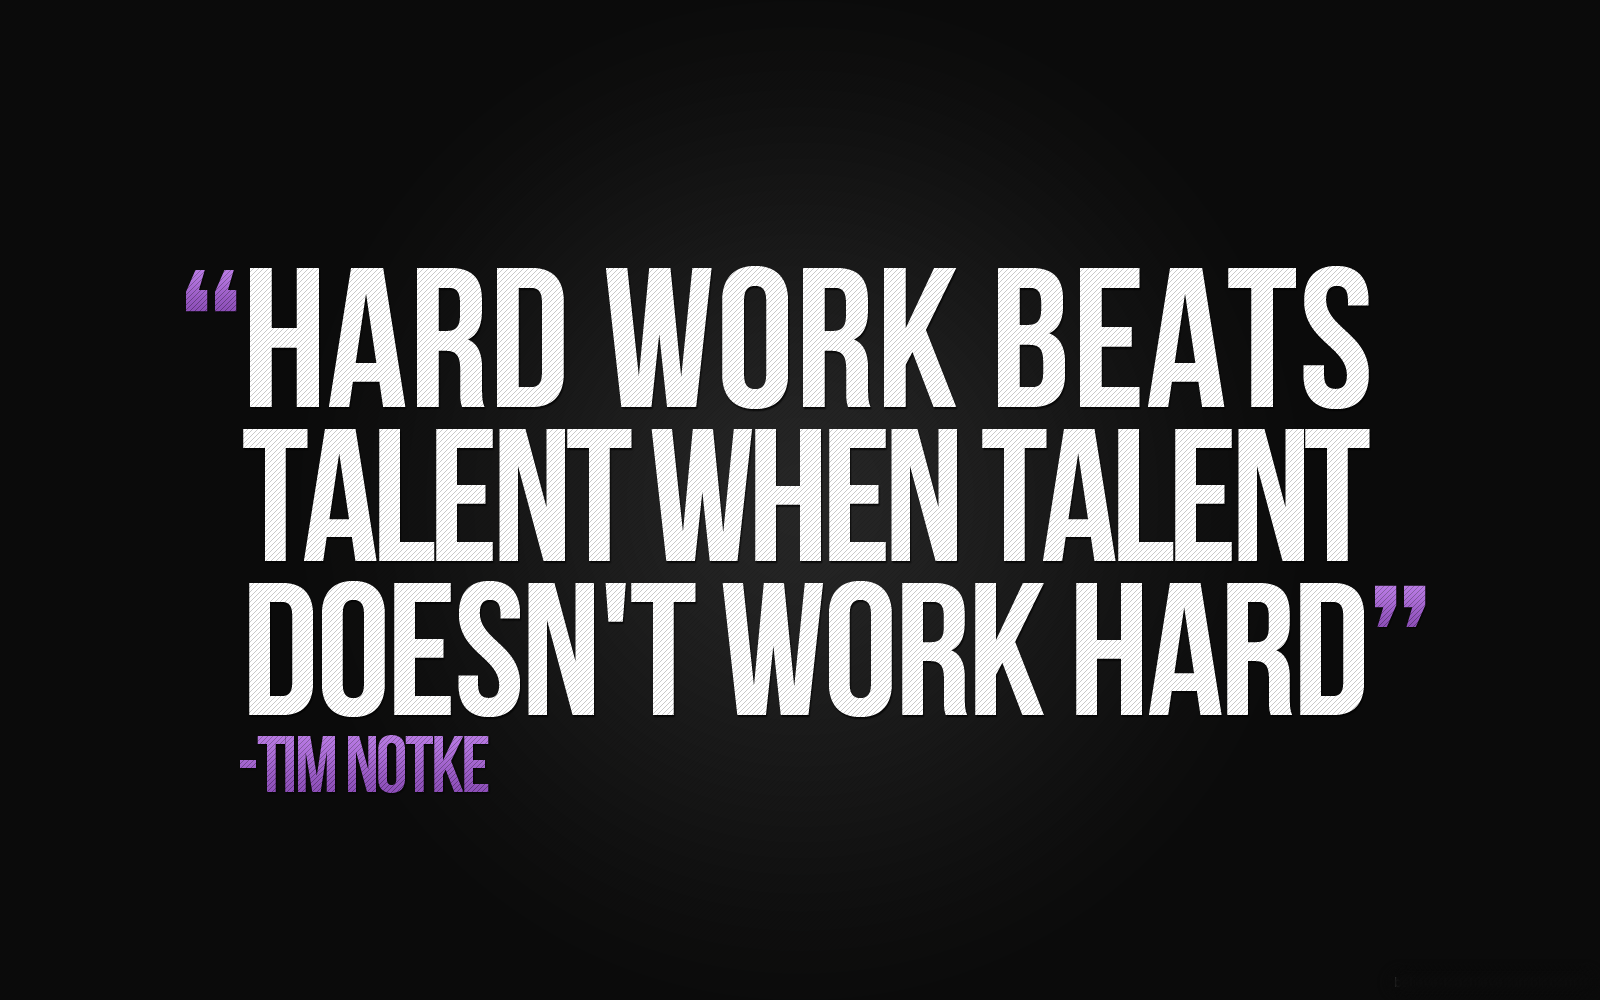 Inspirational Picture Quotes That Will Motivate Your Mind, Part 4. Work quotes, Hard work beats talent, Motivational quote posters